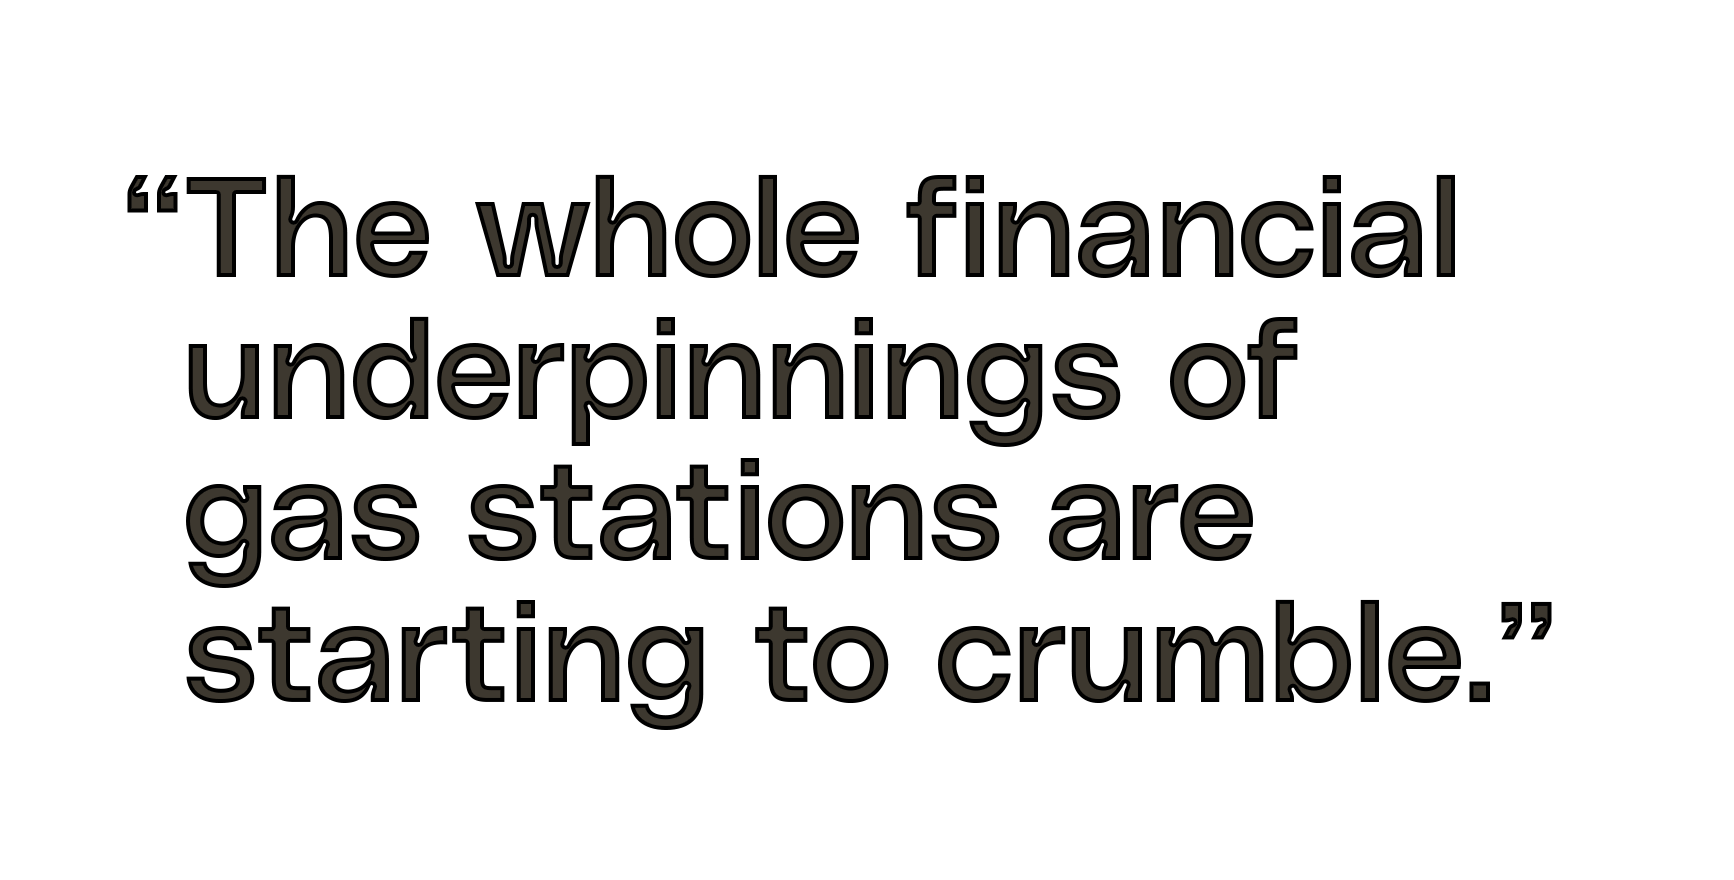 “The whole financial underpinnings of gas stations are starting to crumble.